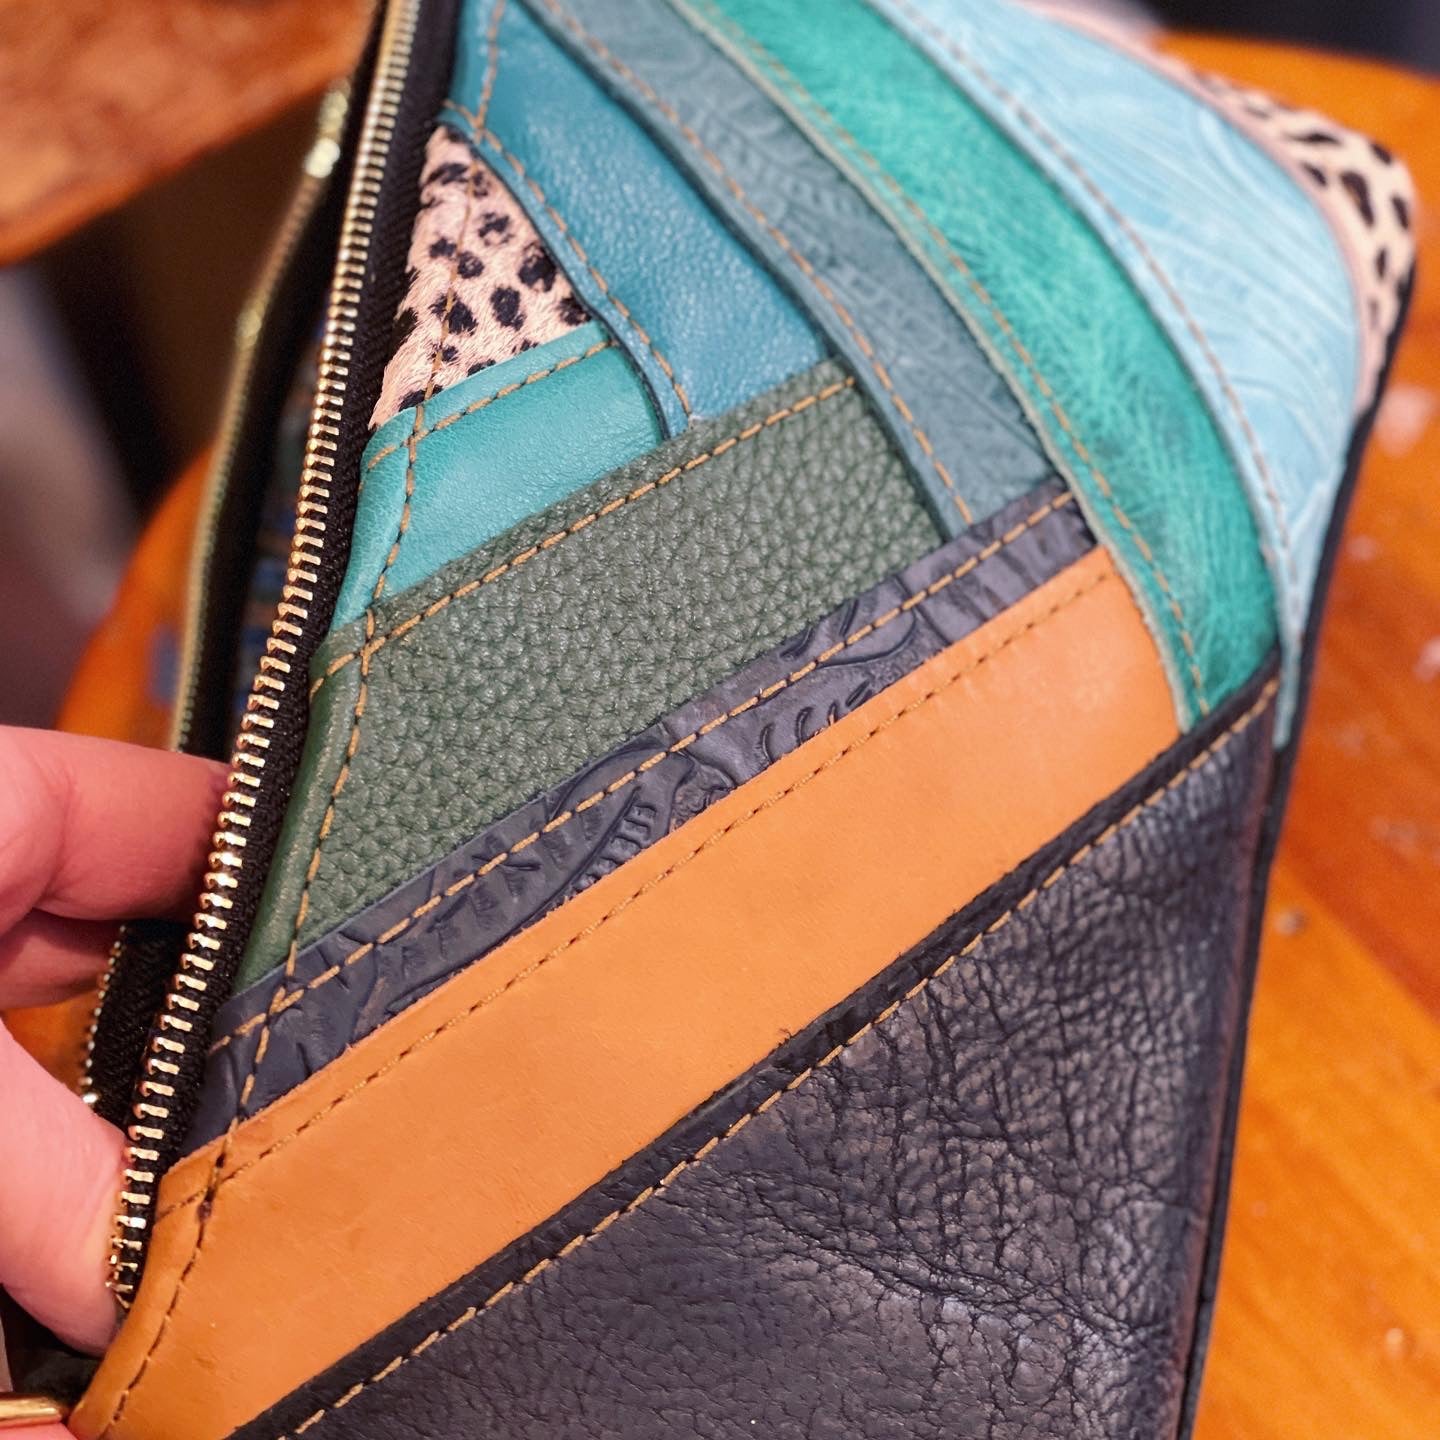 Striped Leather Clutch- Teal/Tan/Spotted Cowhide